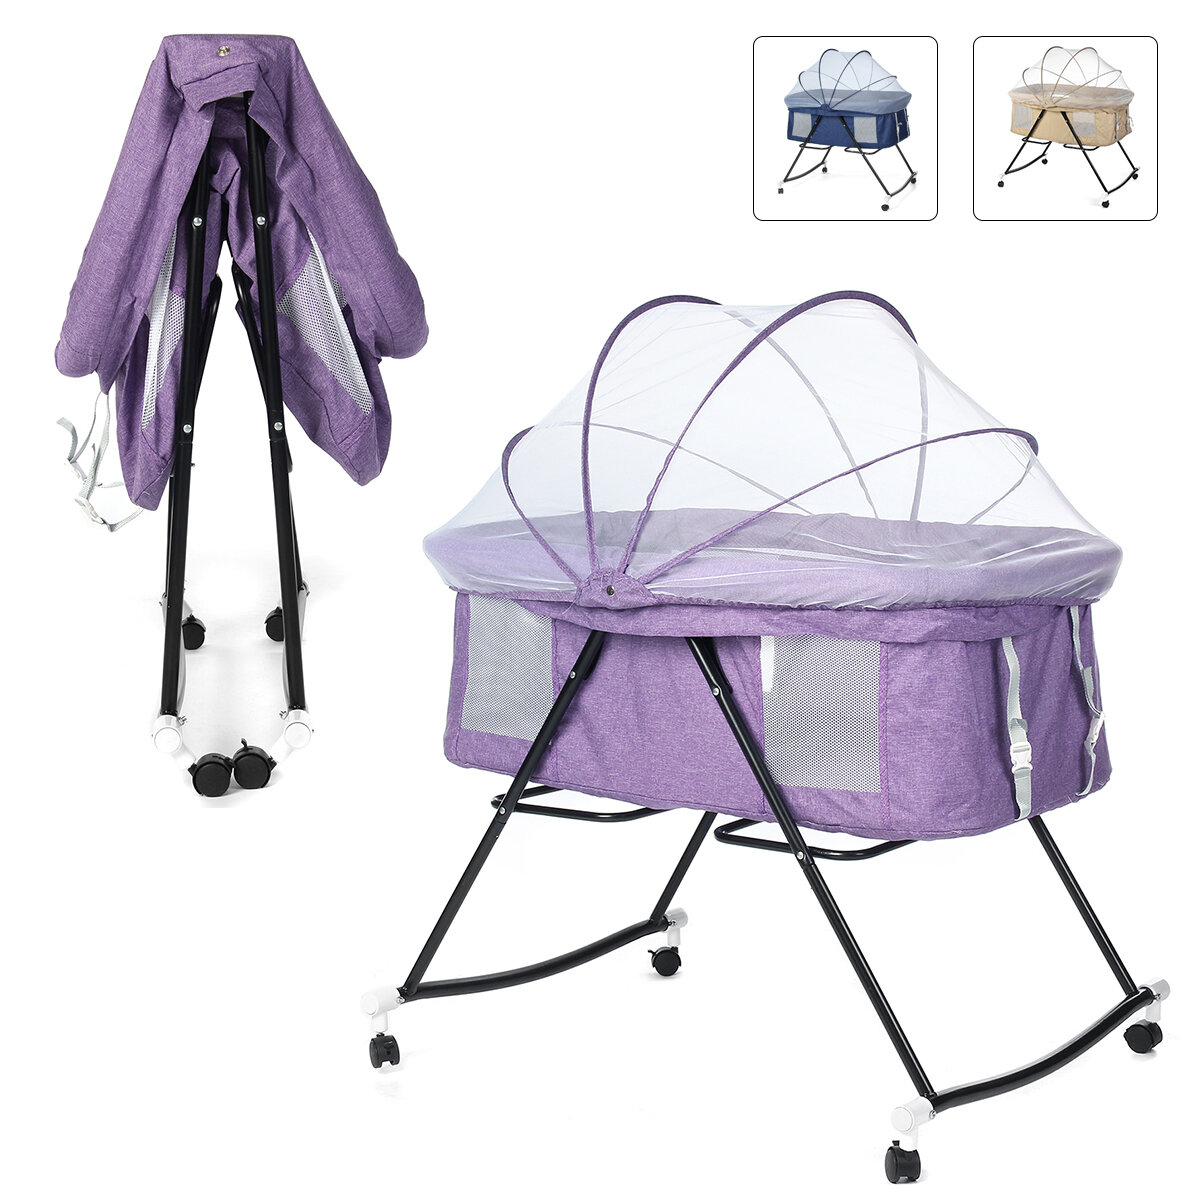 

Multifunctional Baby Bed With Mosquito Net Portable Folding Newborn Baby Bedside Bed Cradle Bed Play Game Bed for 0-3 Ye